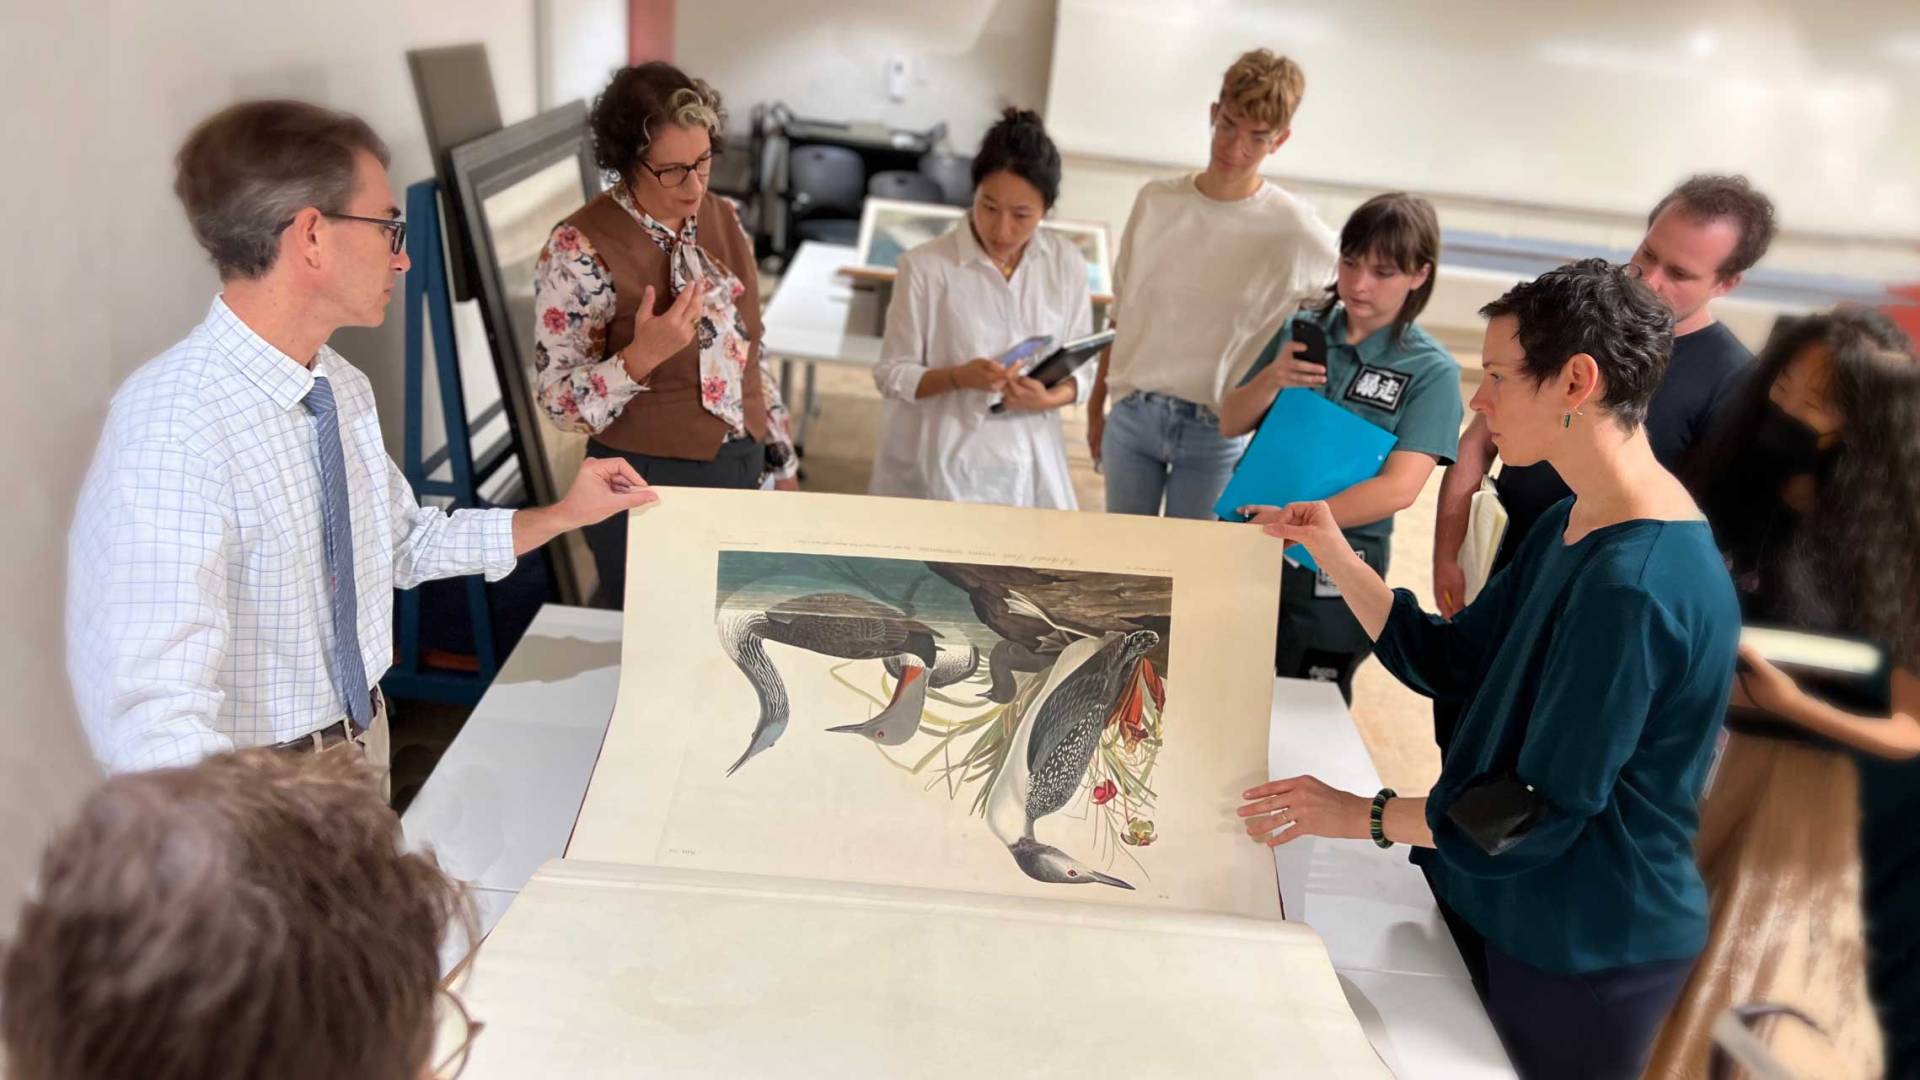 Rachael DeLue lectures about the bird print in a rare book